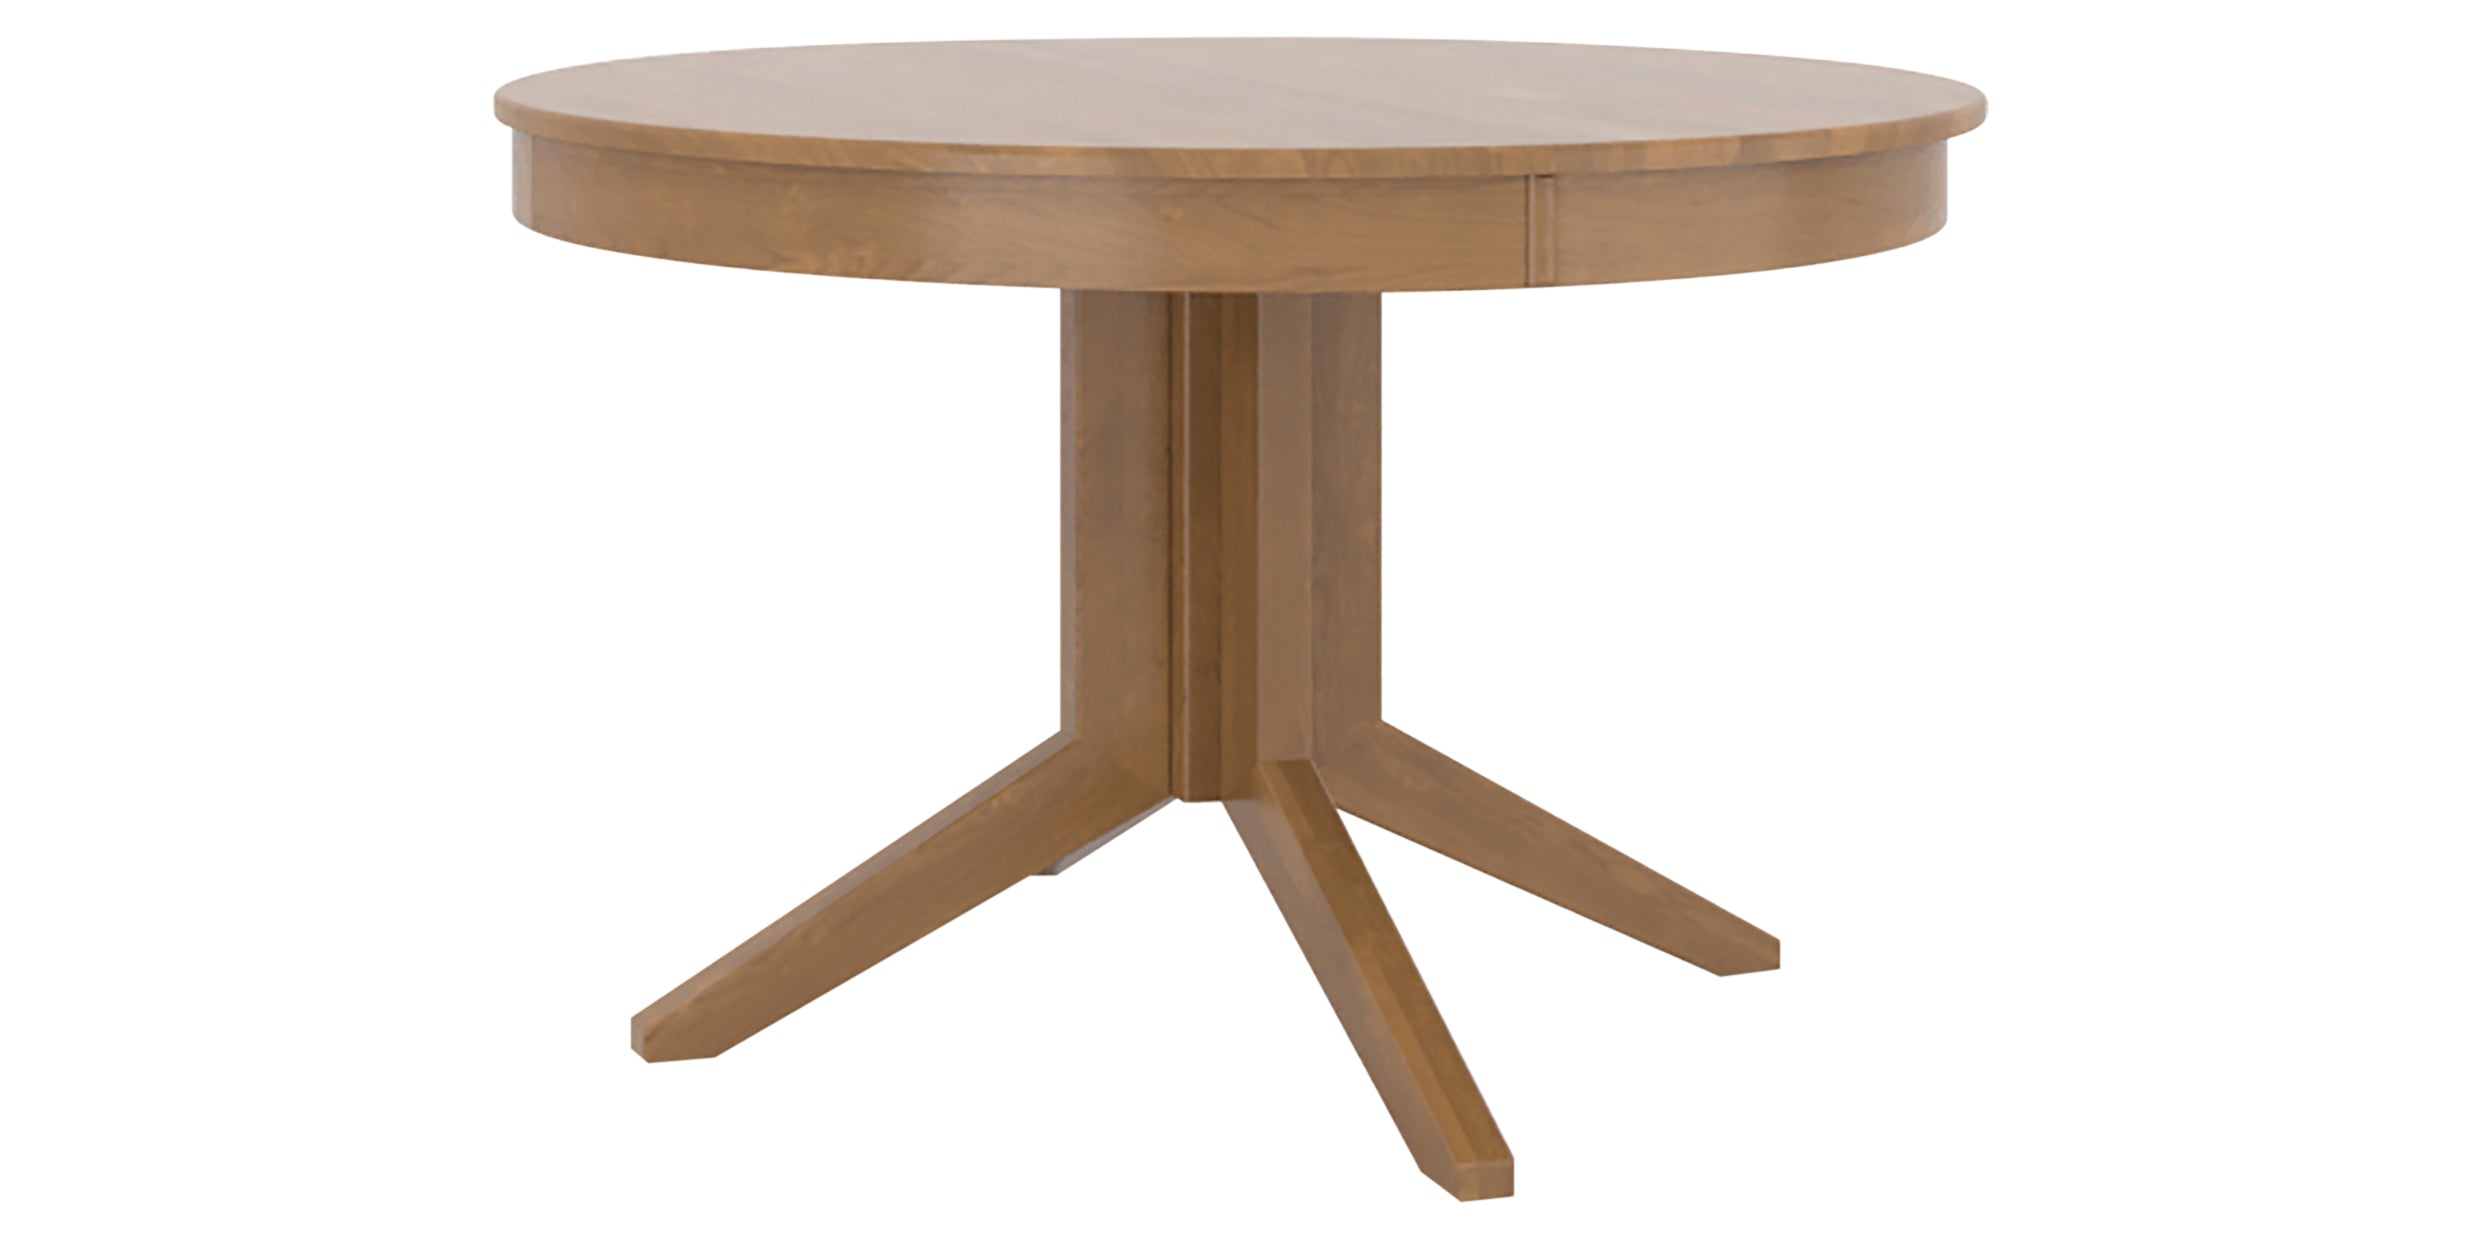 Honey Washed | Canadel Core Dining Table 4848 with XQ Base | Valley Ridge Furniture